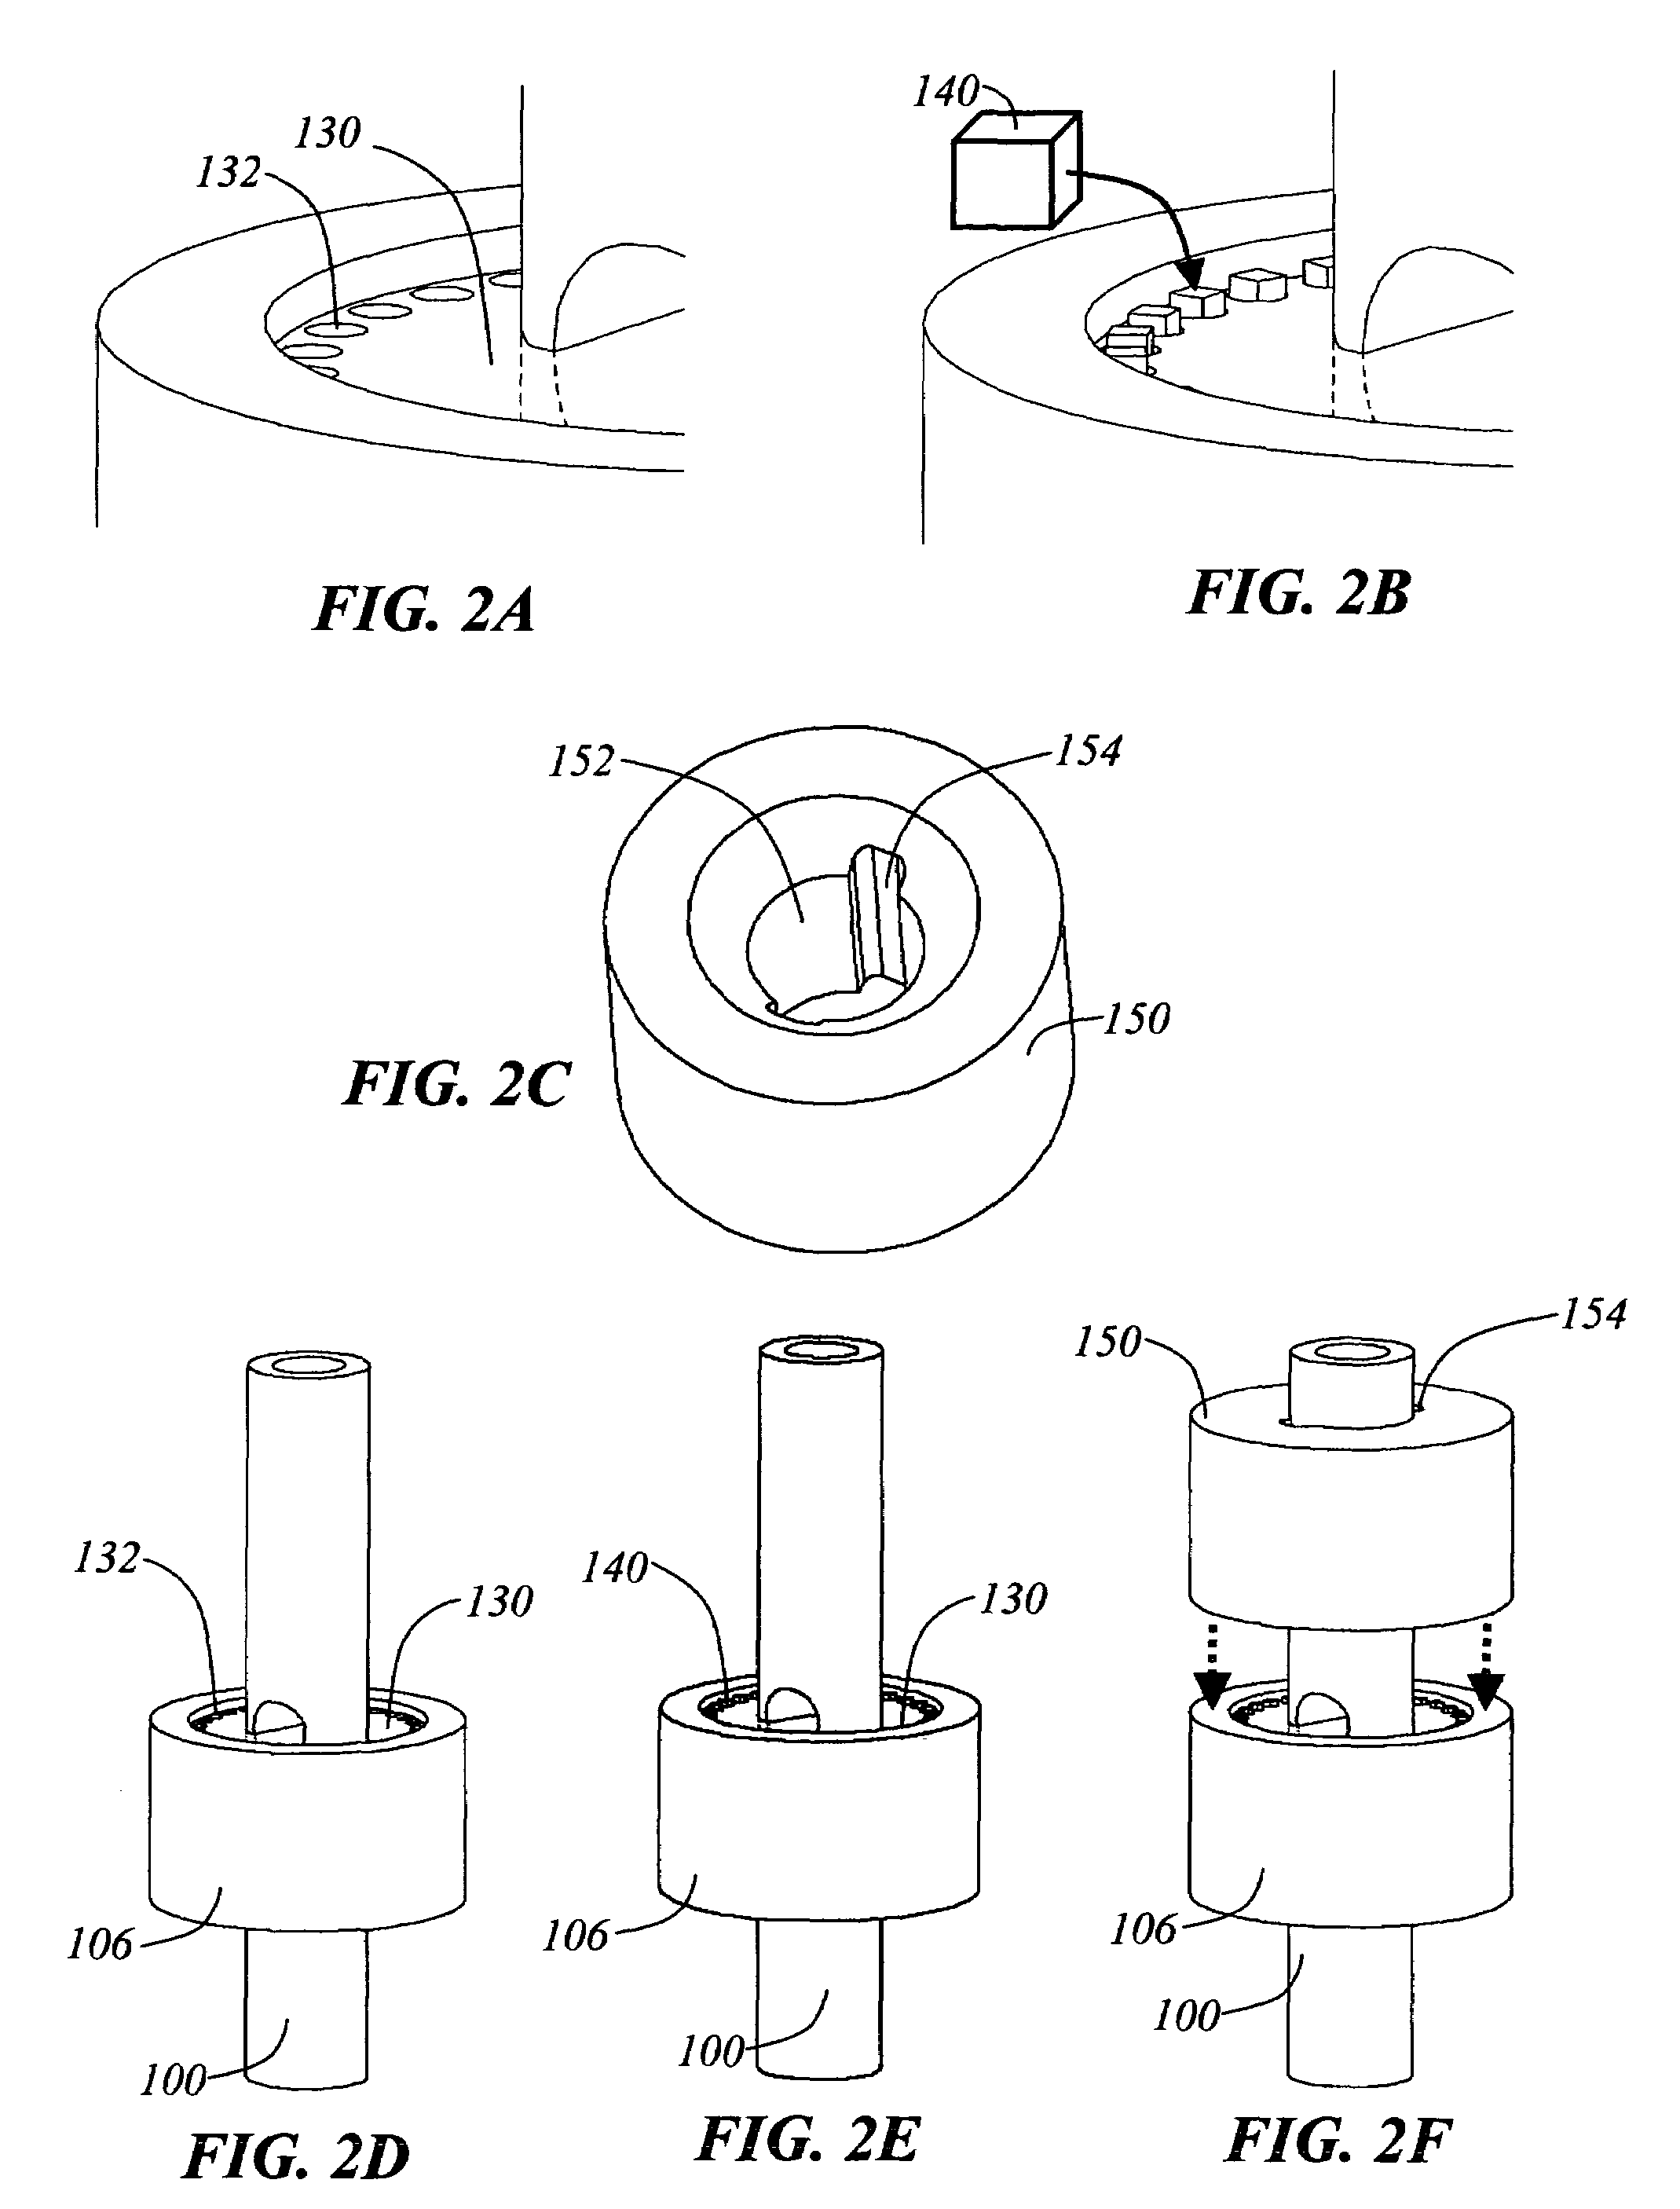 Methods and apparatuses for the automated production, collection, handling, and imaging of large numbers of serial tissue sections